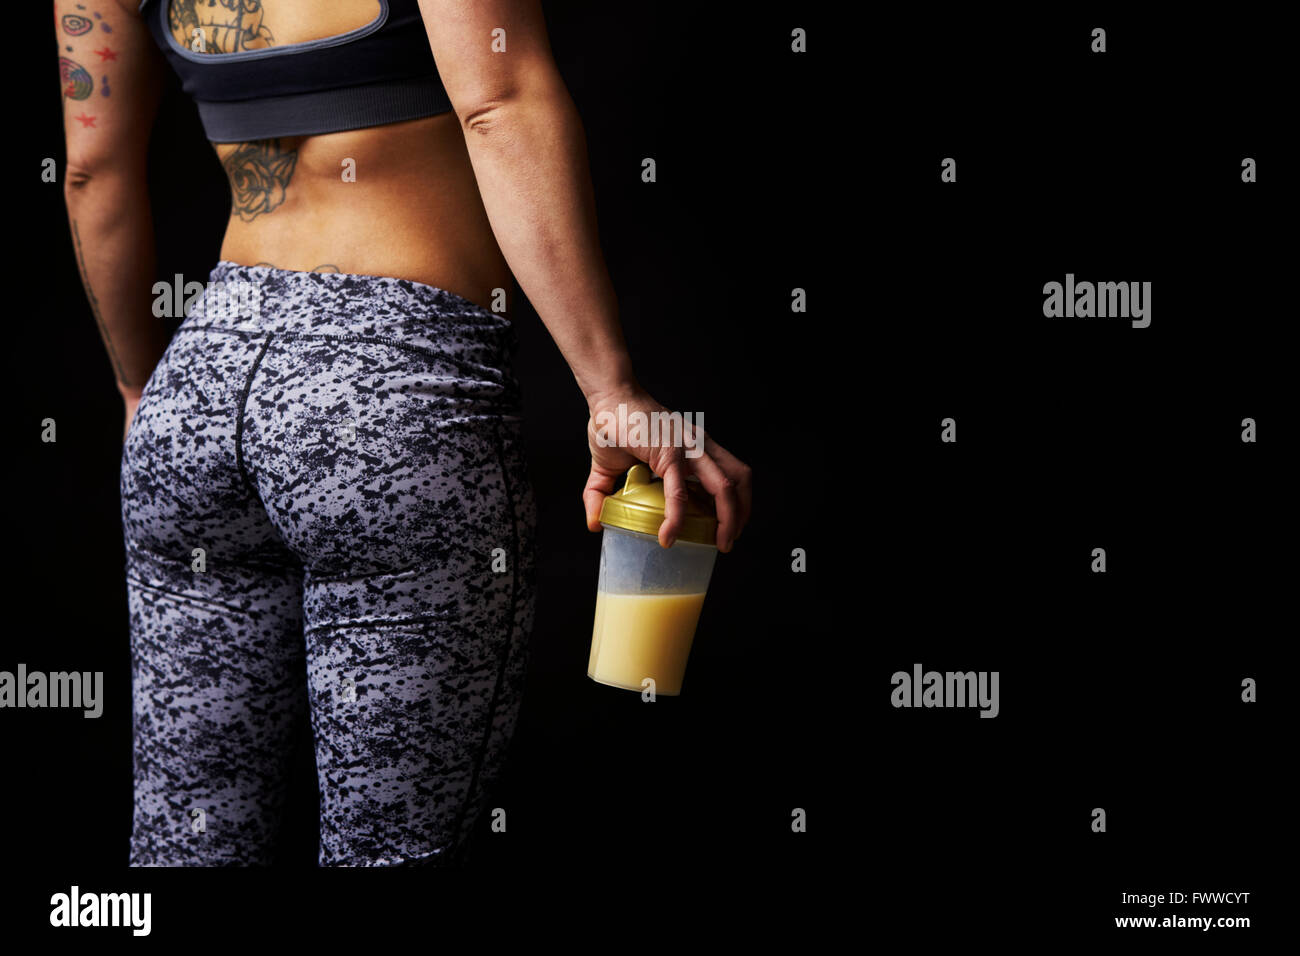 Mid-section of muscular young woman holding drink, back view Stock Photo